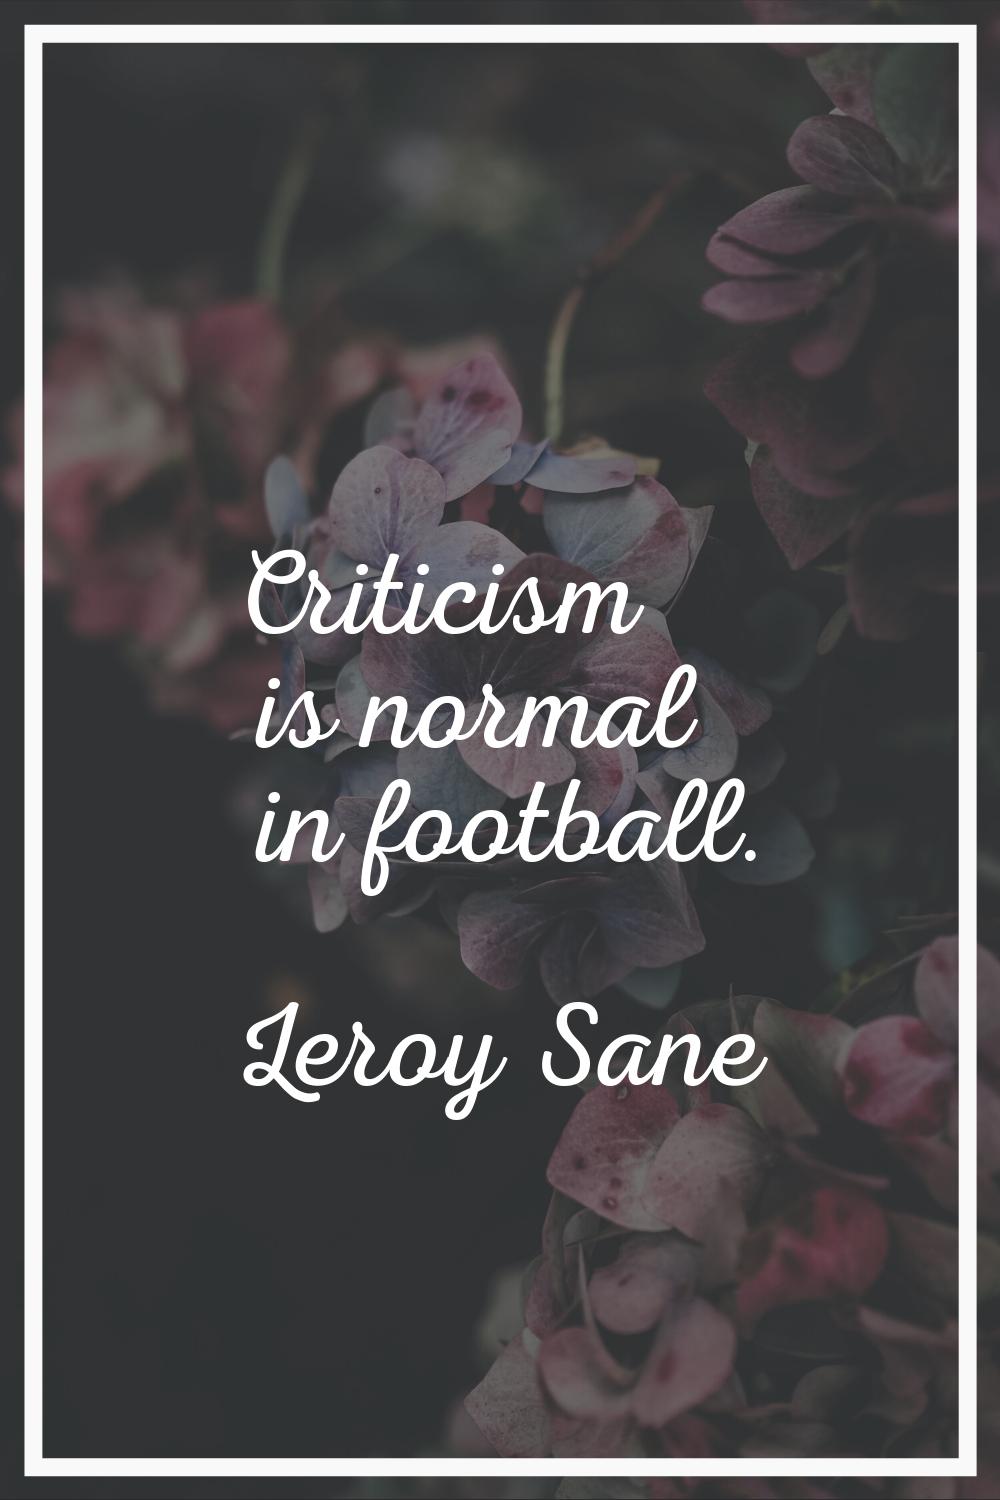 Criticism is normal in football.